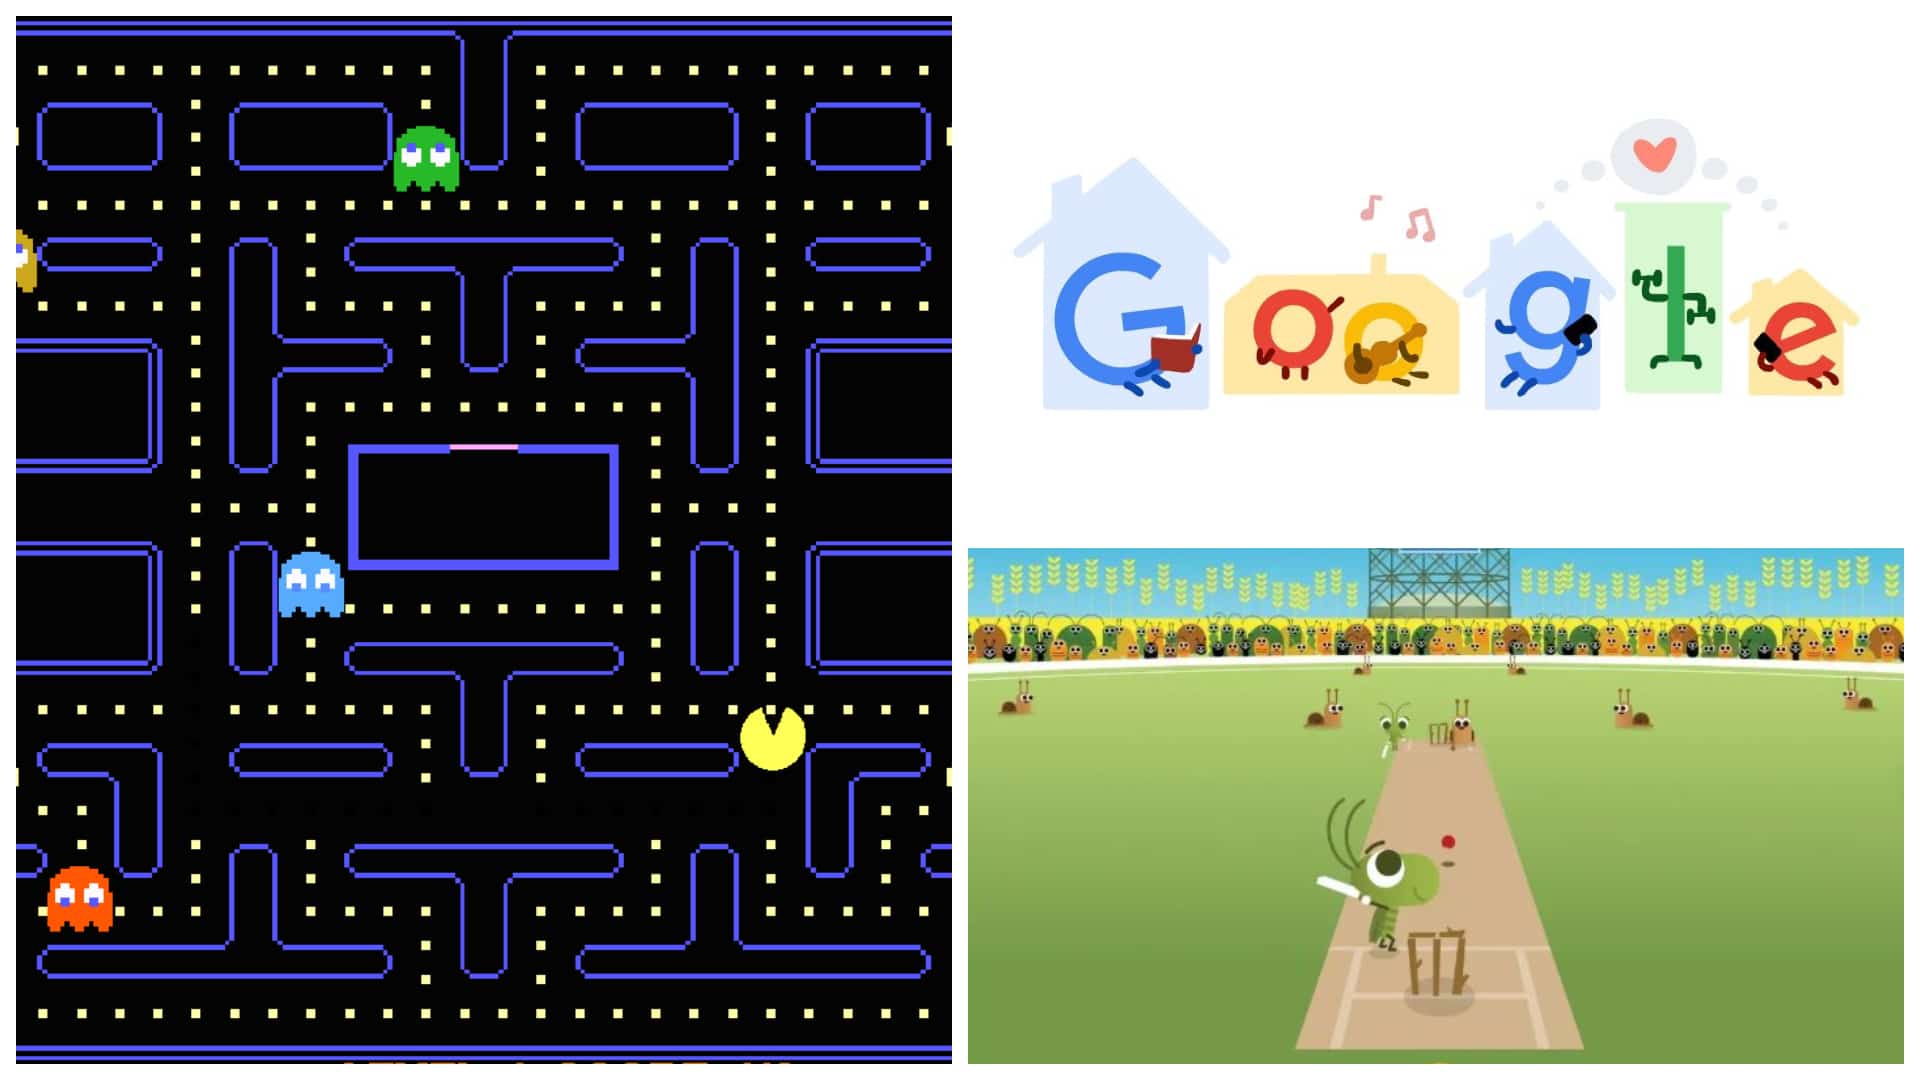 Bored Google Doodle Returns With Popular Interactive Games